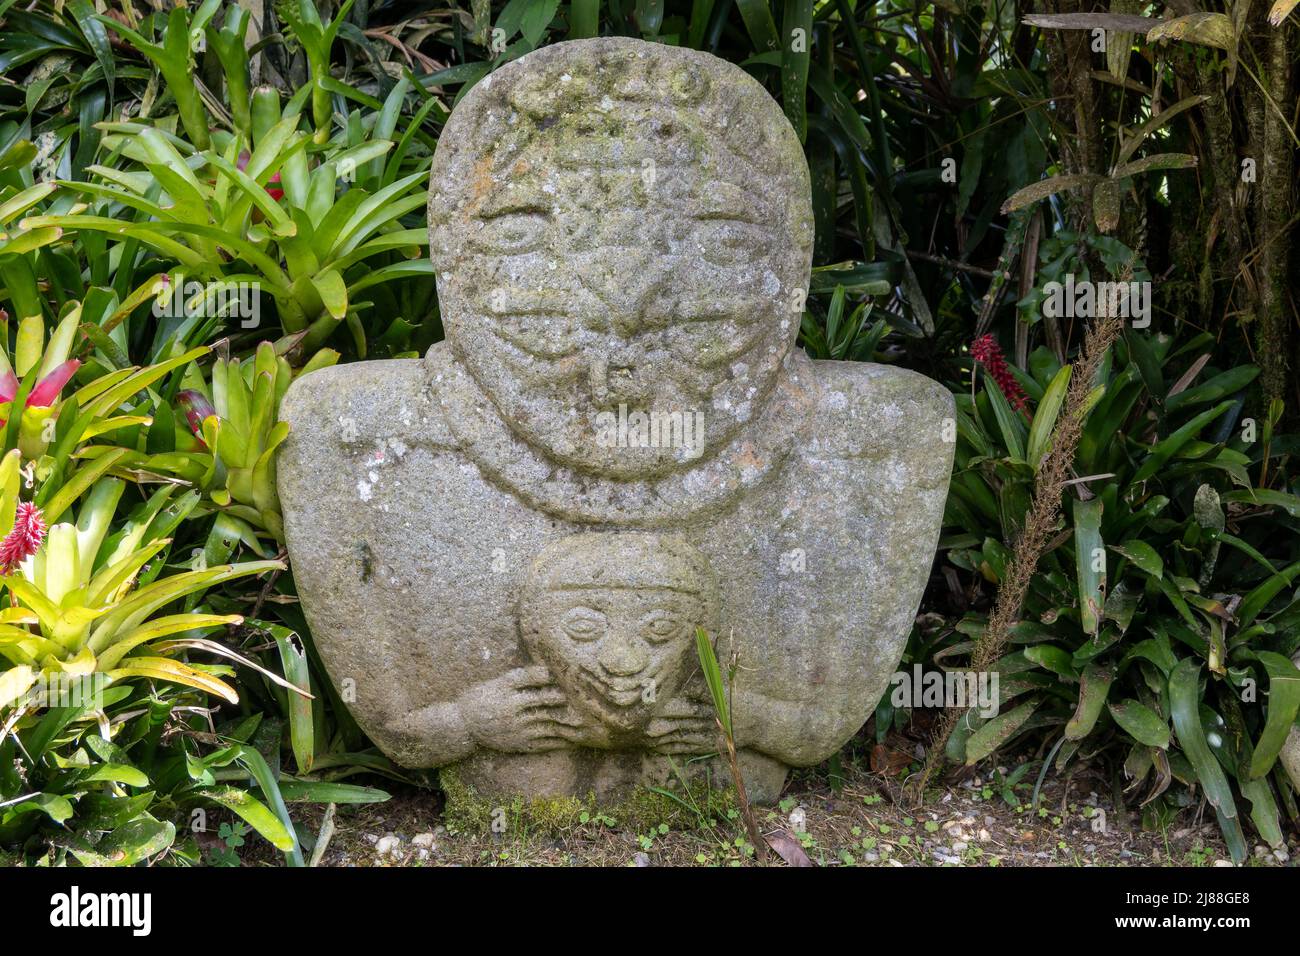 Stone carved statue in a garden. Colombia, South America. Stock Photo